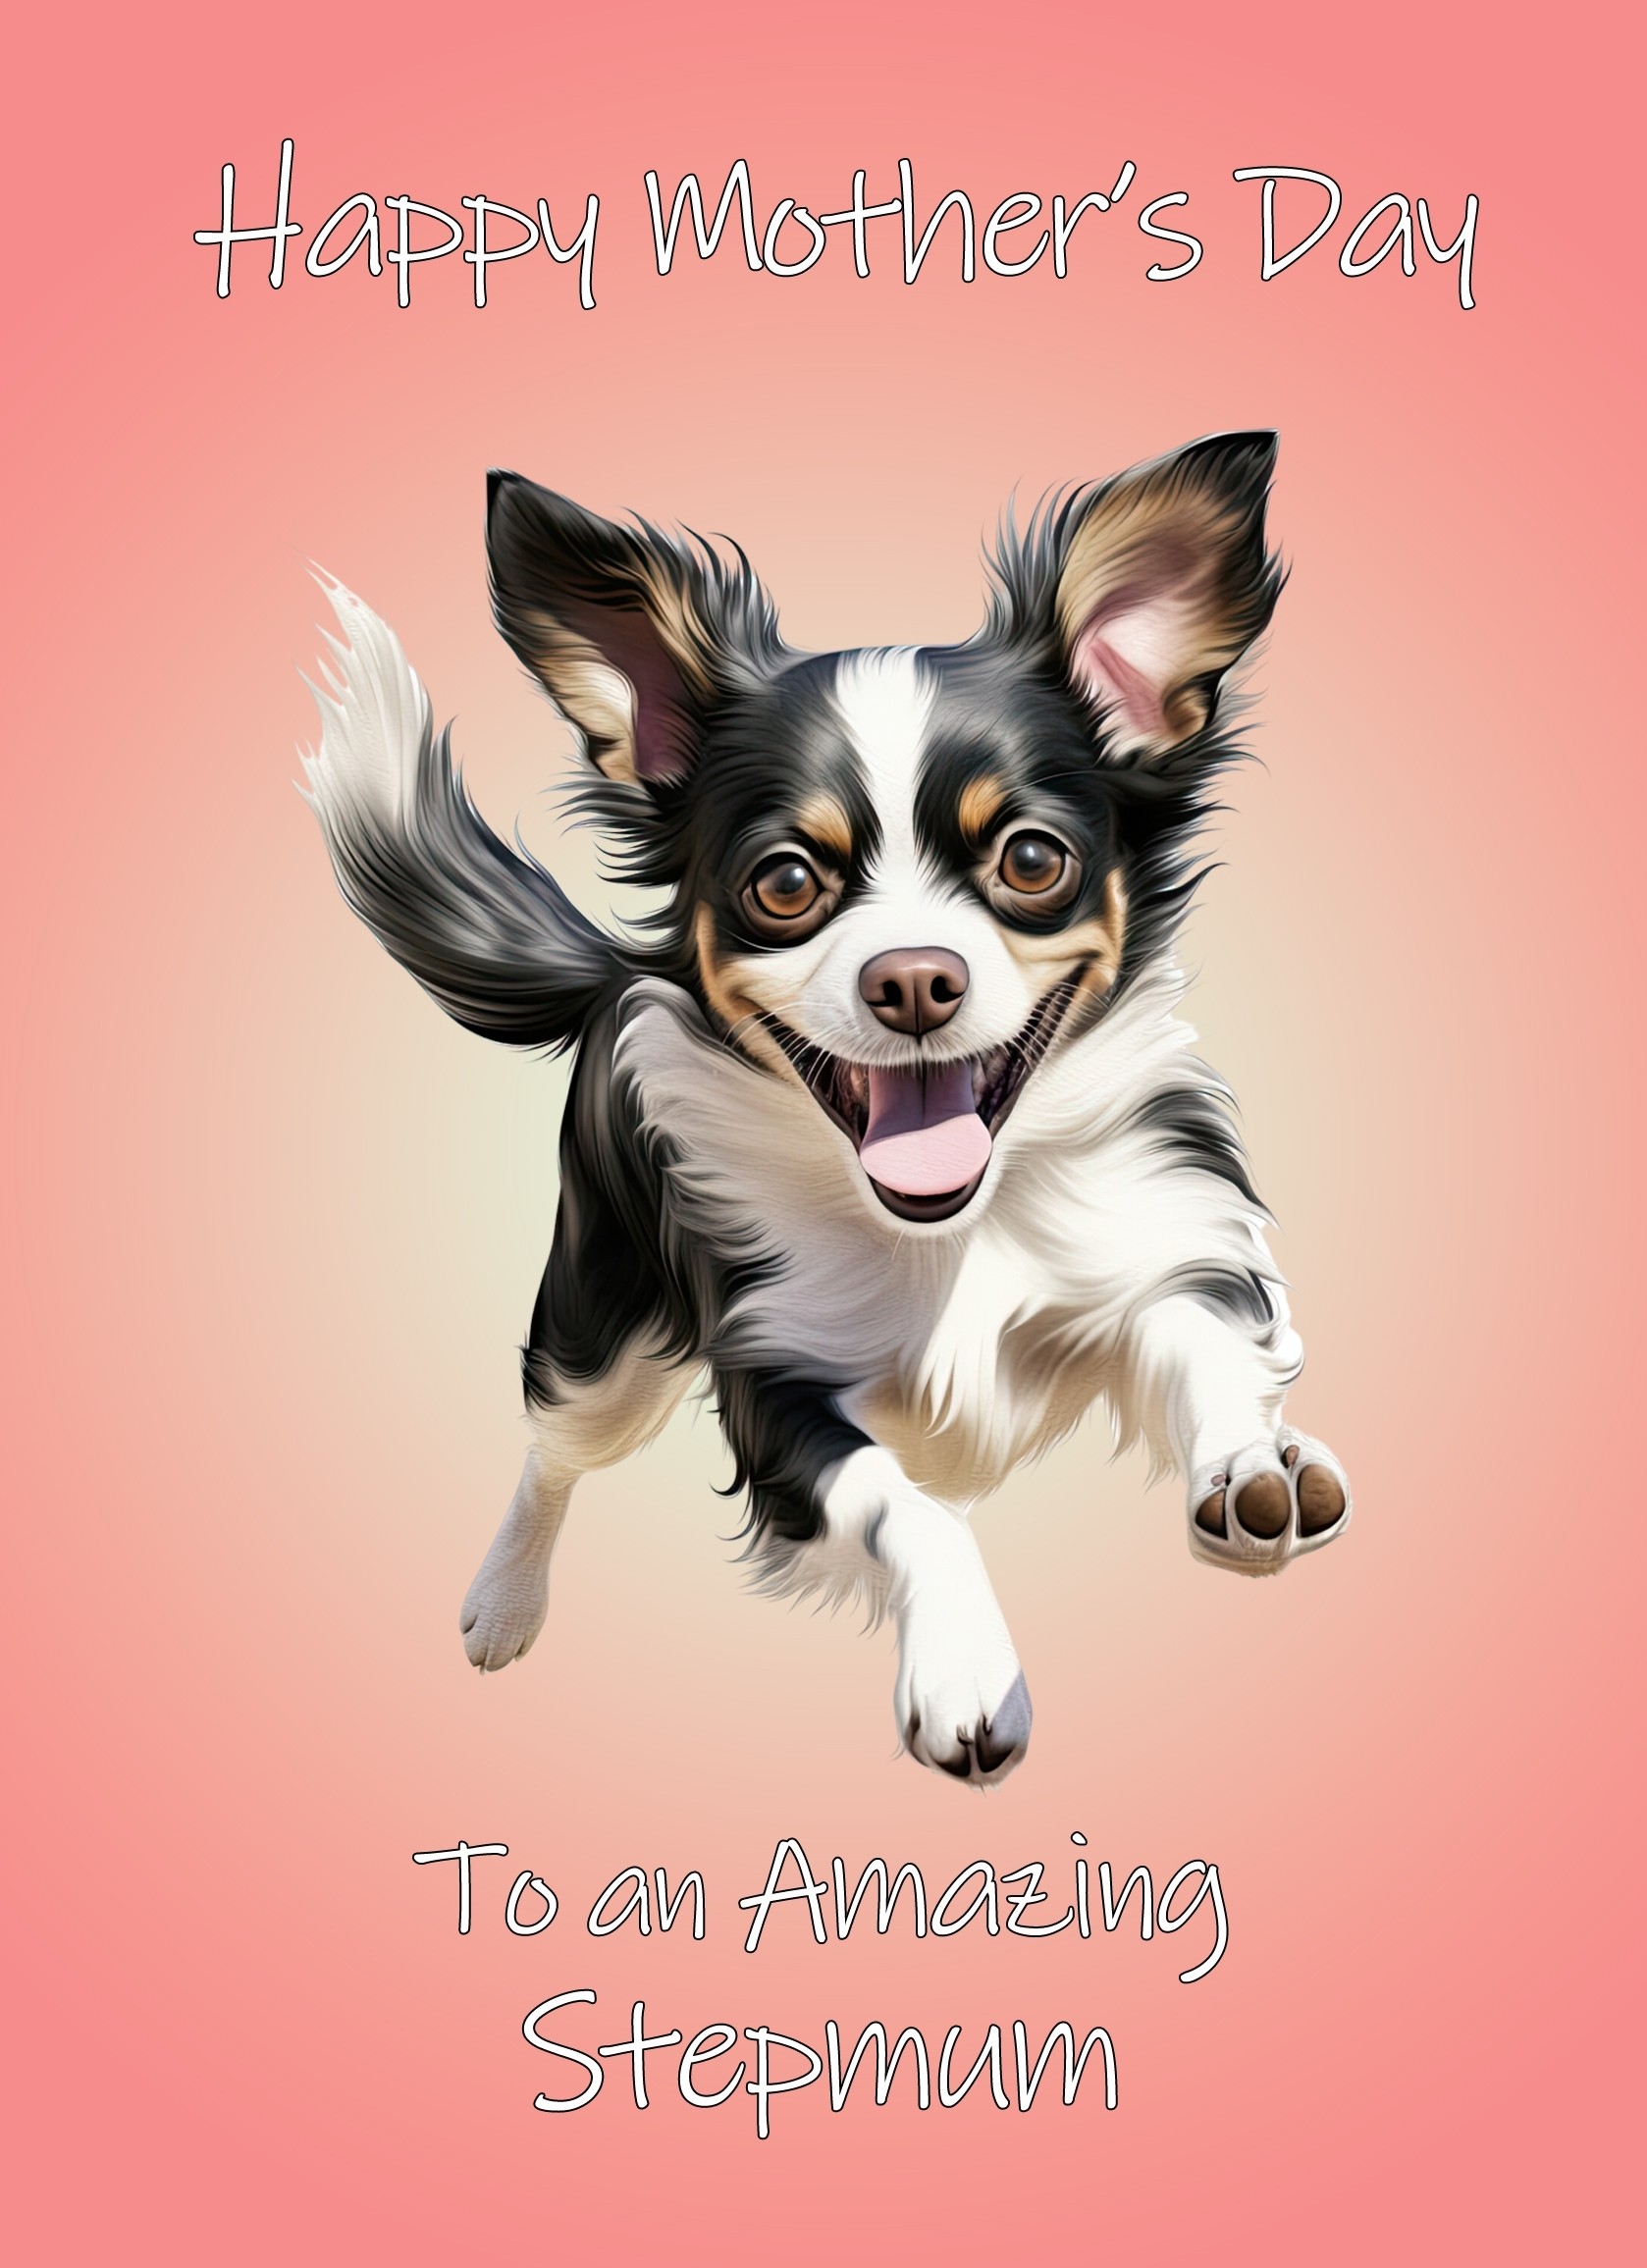 Chihuahua Dog Mothers Day Card For Stepmum